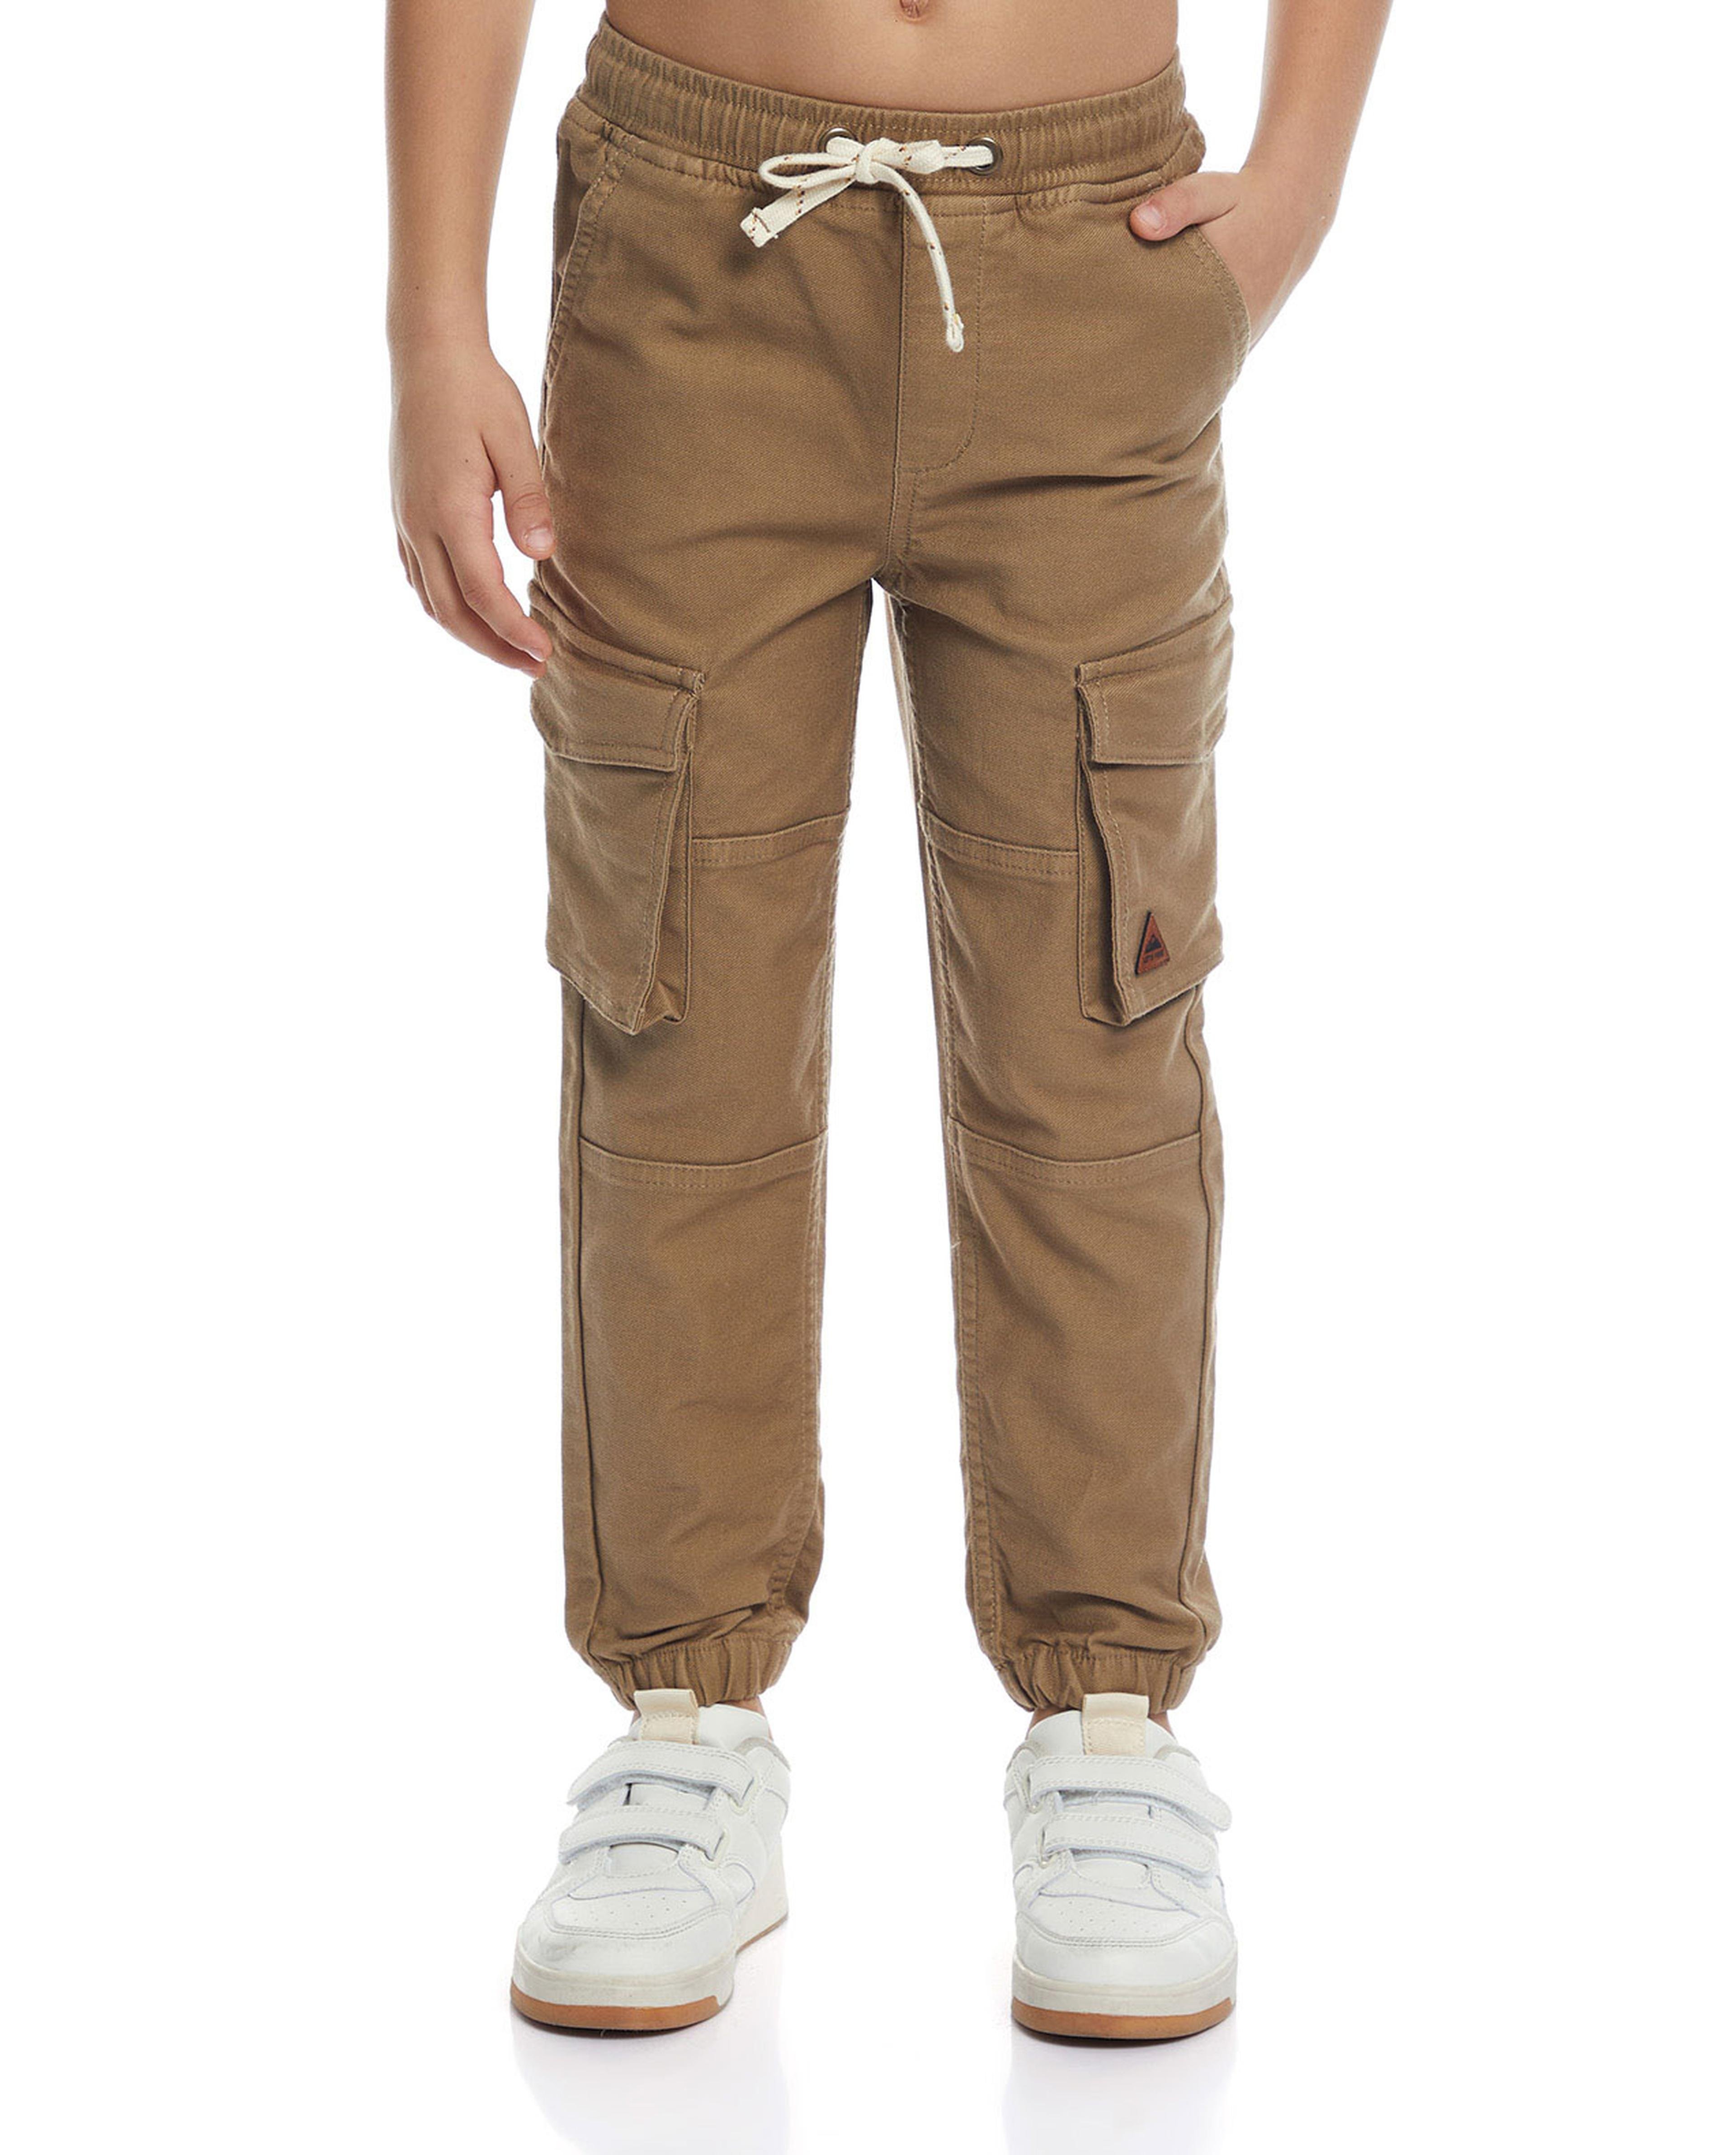 Solid Jogger pants with Drawstring Waist